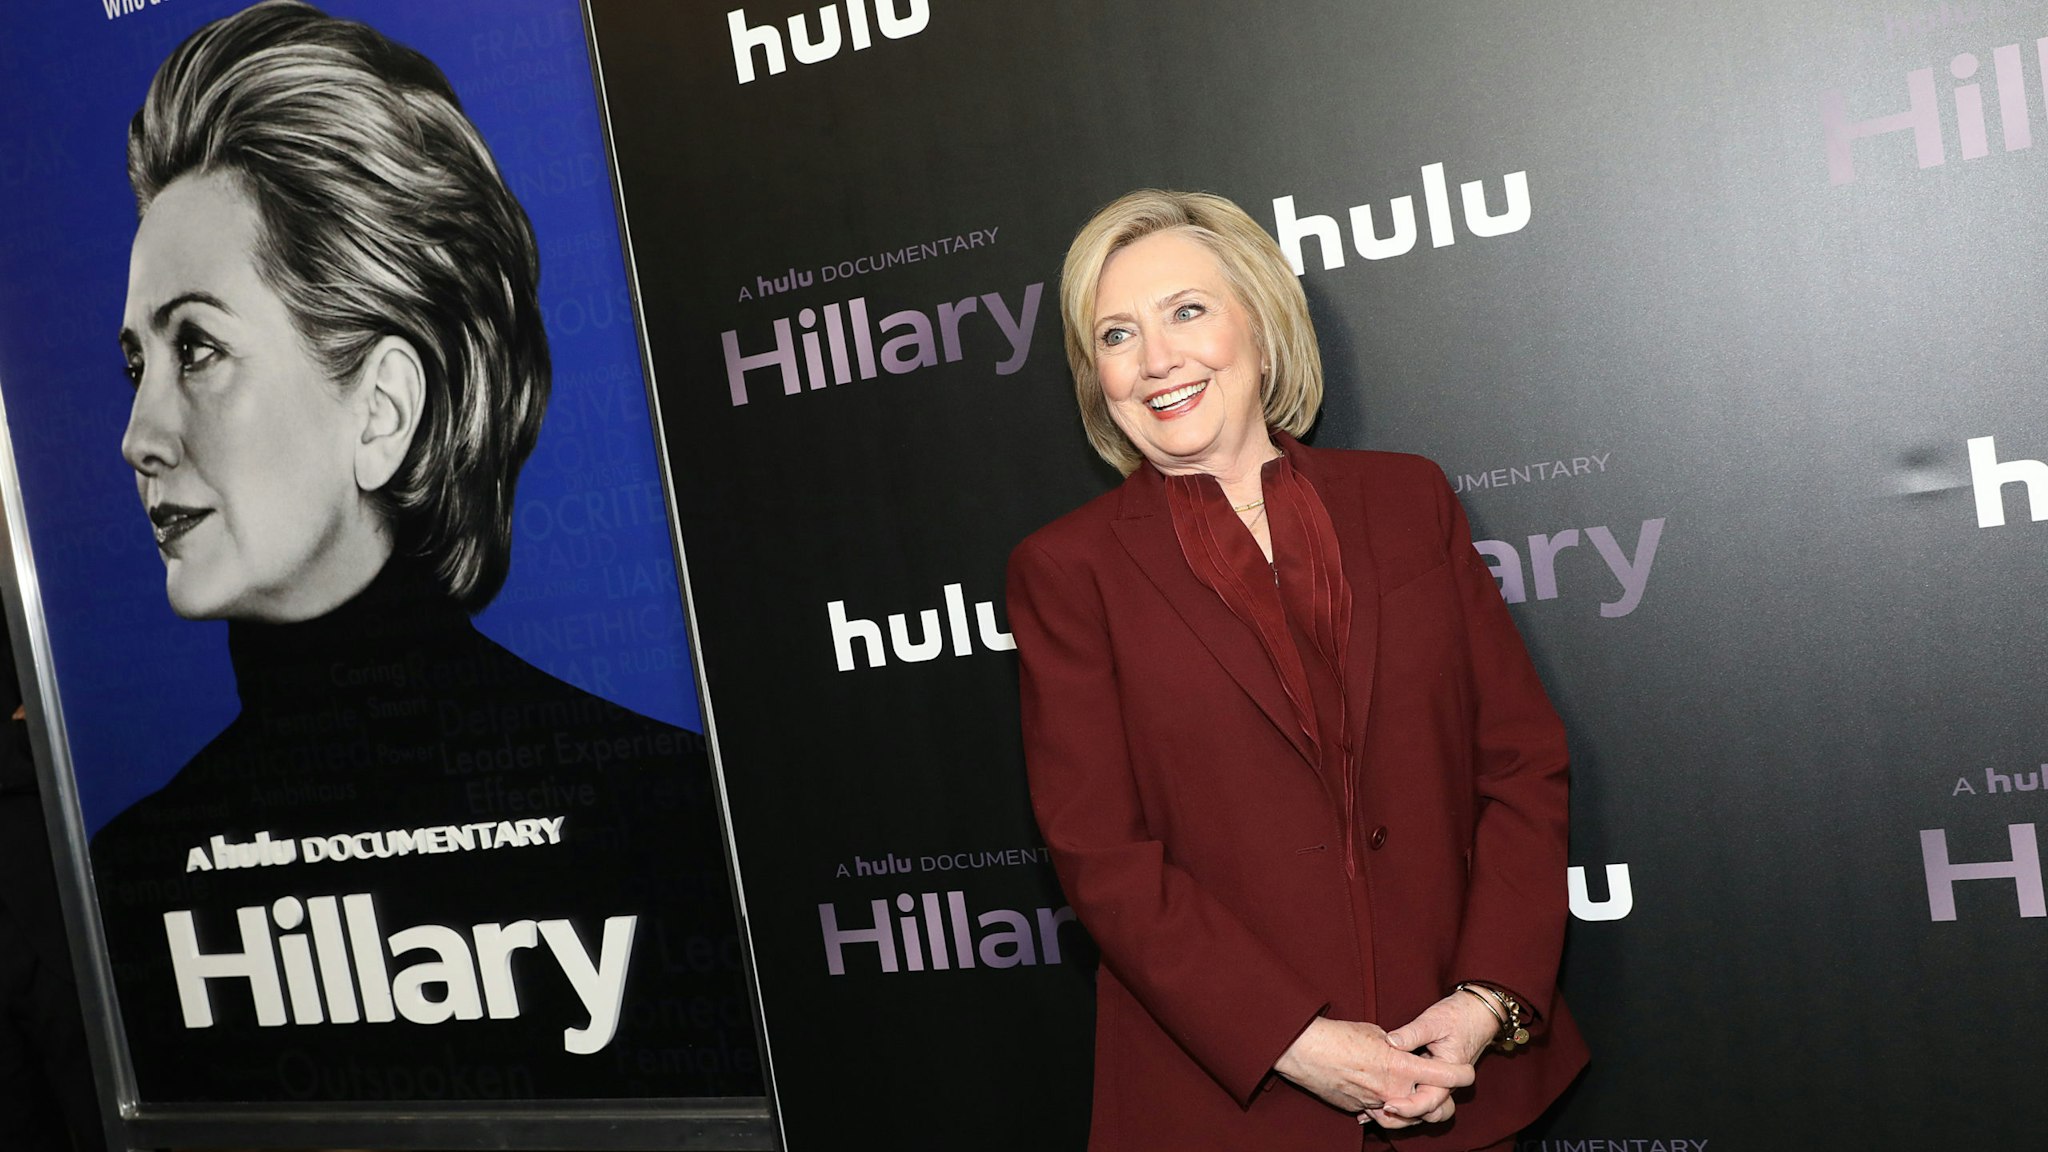 NEW YORK, NEW YORK - MARCH 04: Hillary Rodham Clinton attends Hulu's "Hillary" NYC Premiere on March 04, 2020 in New York City. (Photo by Monica Schipper/Getty Images for Hulu)